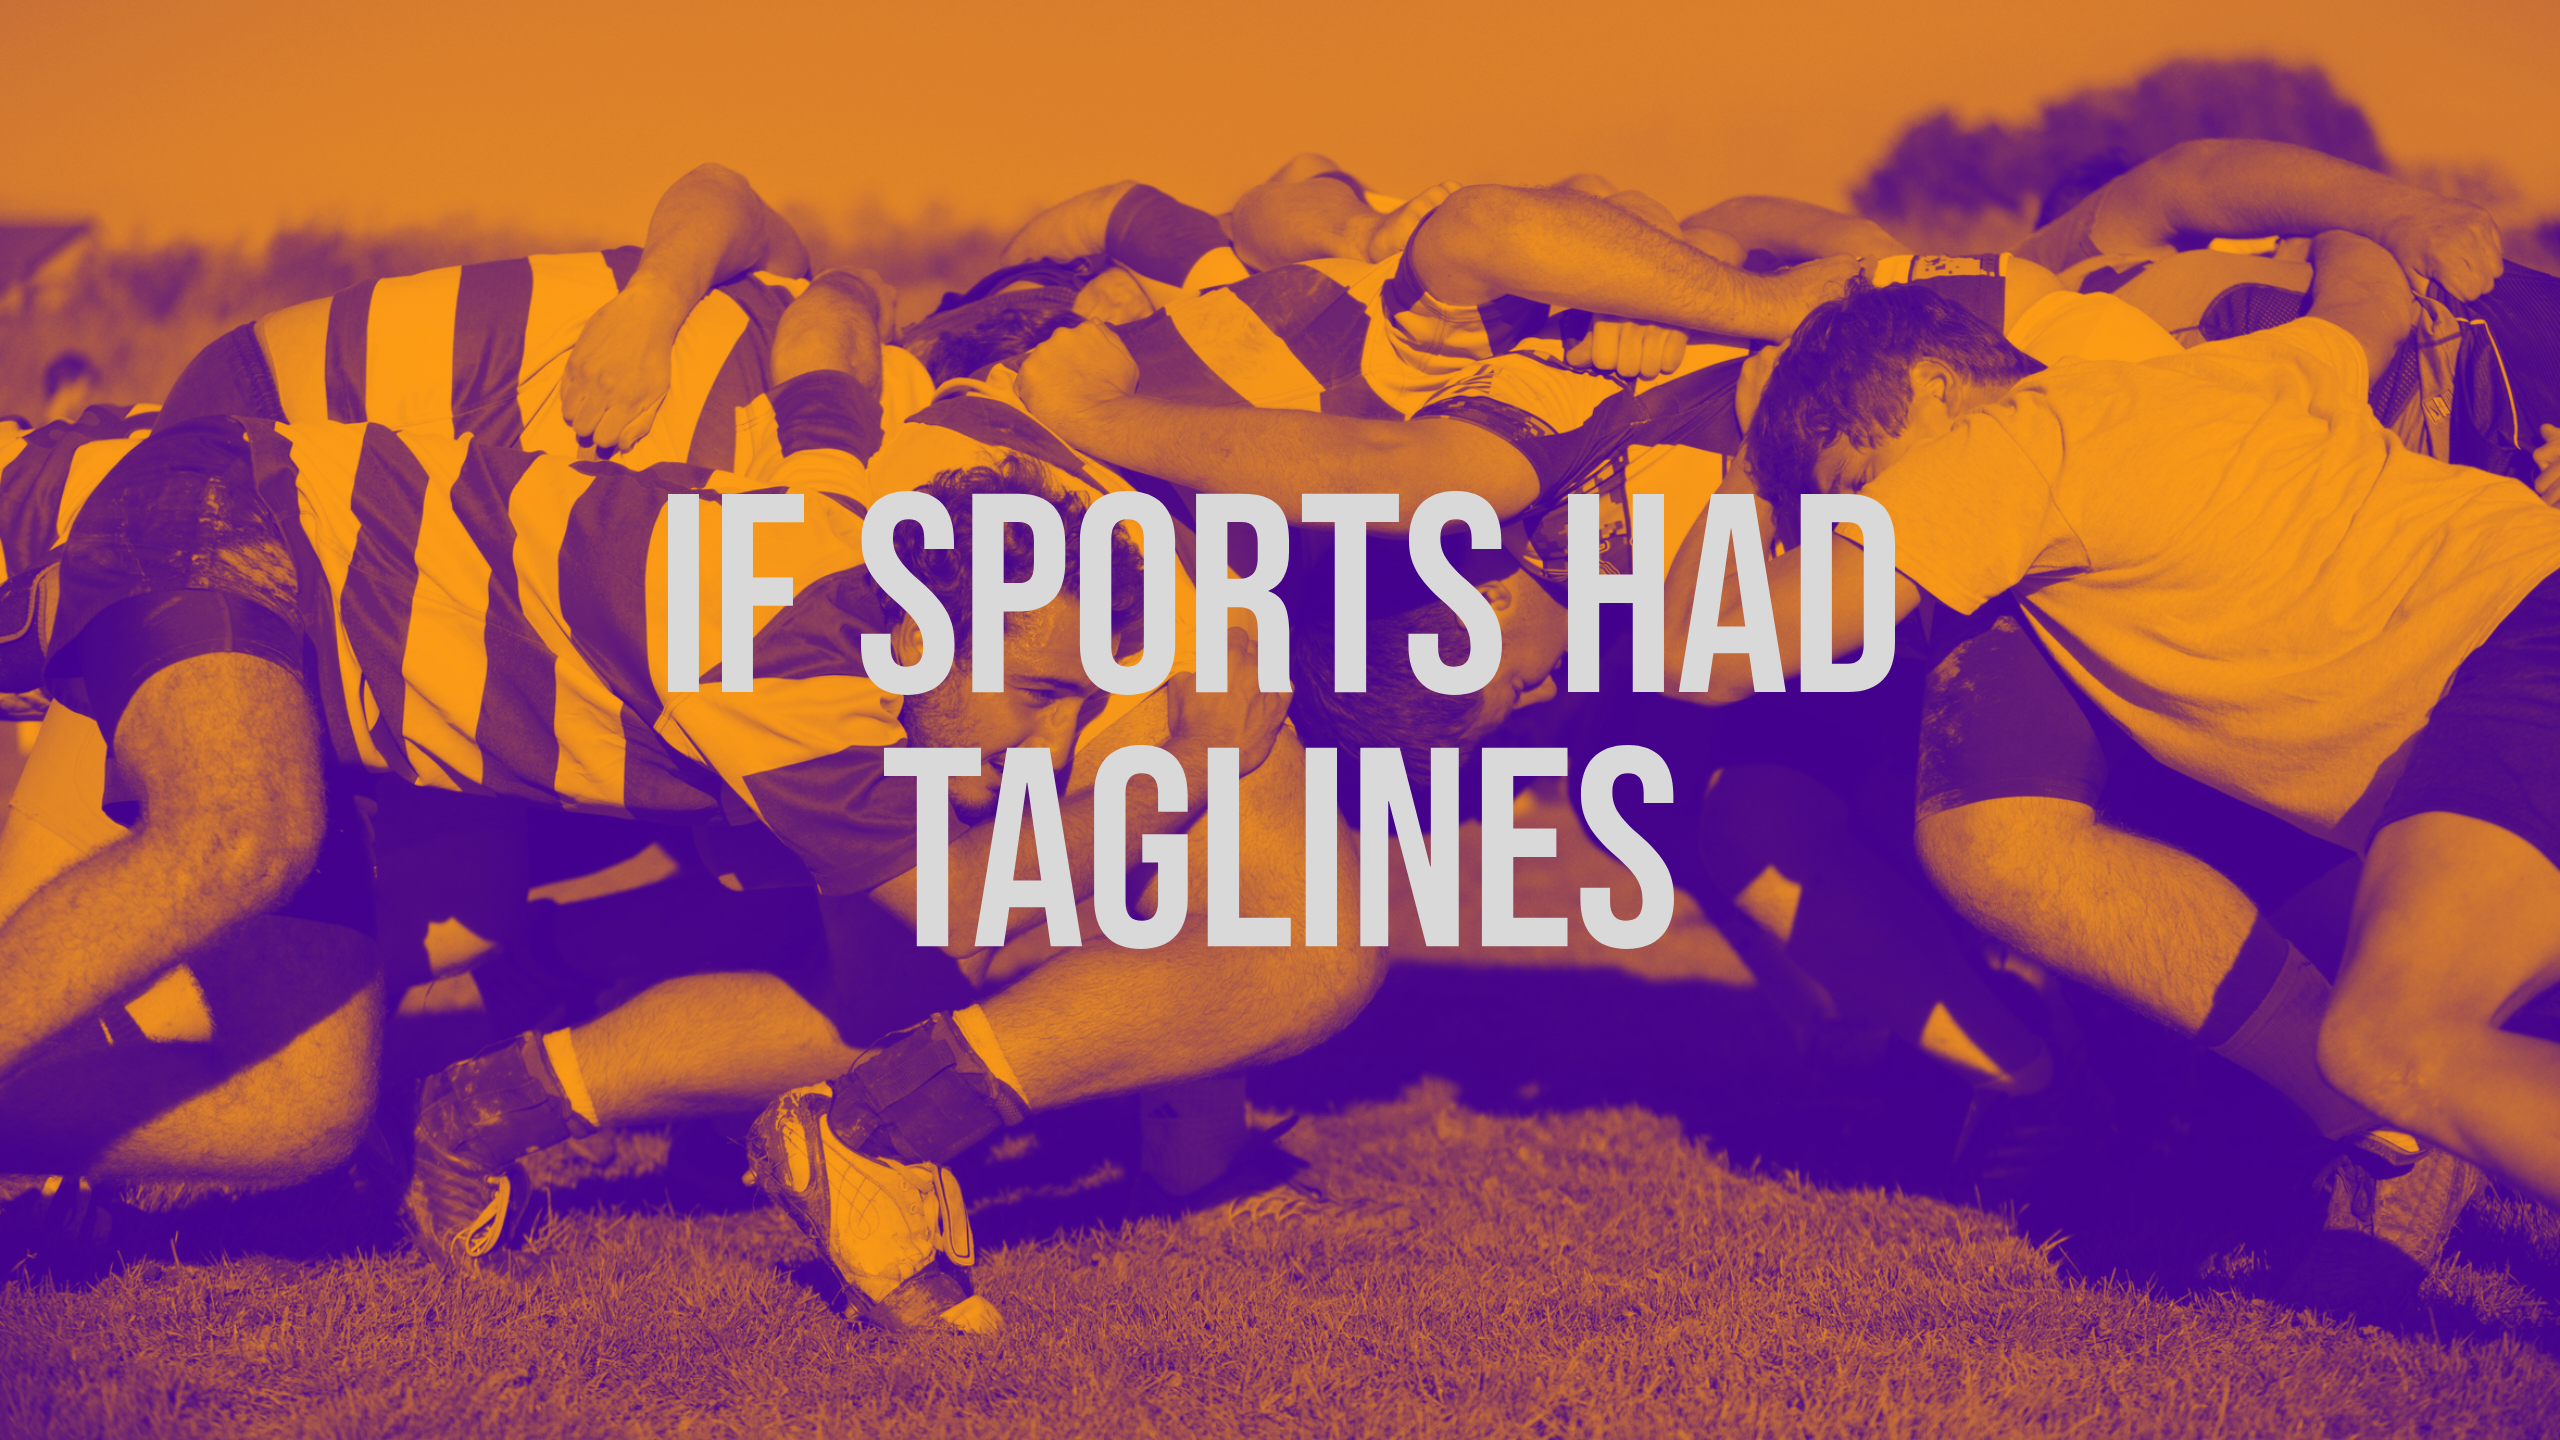 What if…spectator sports had taglines